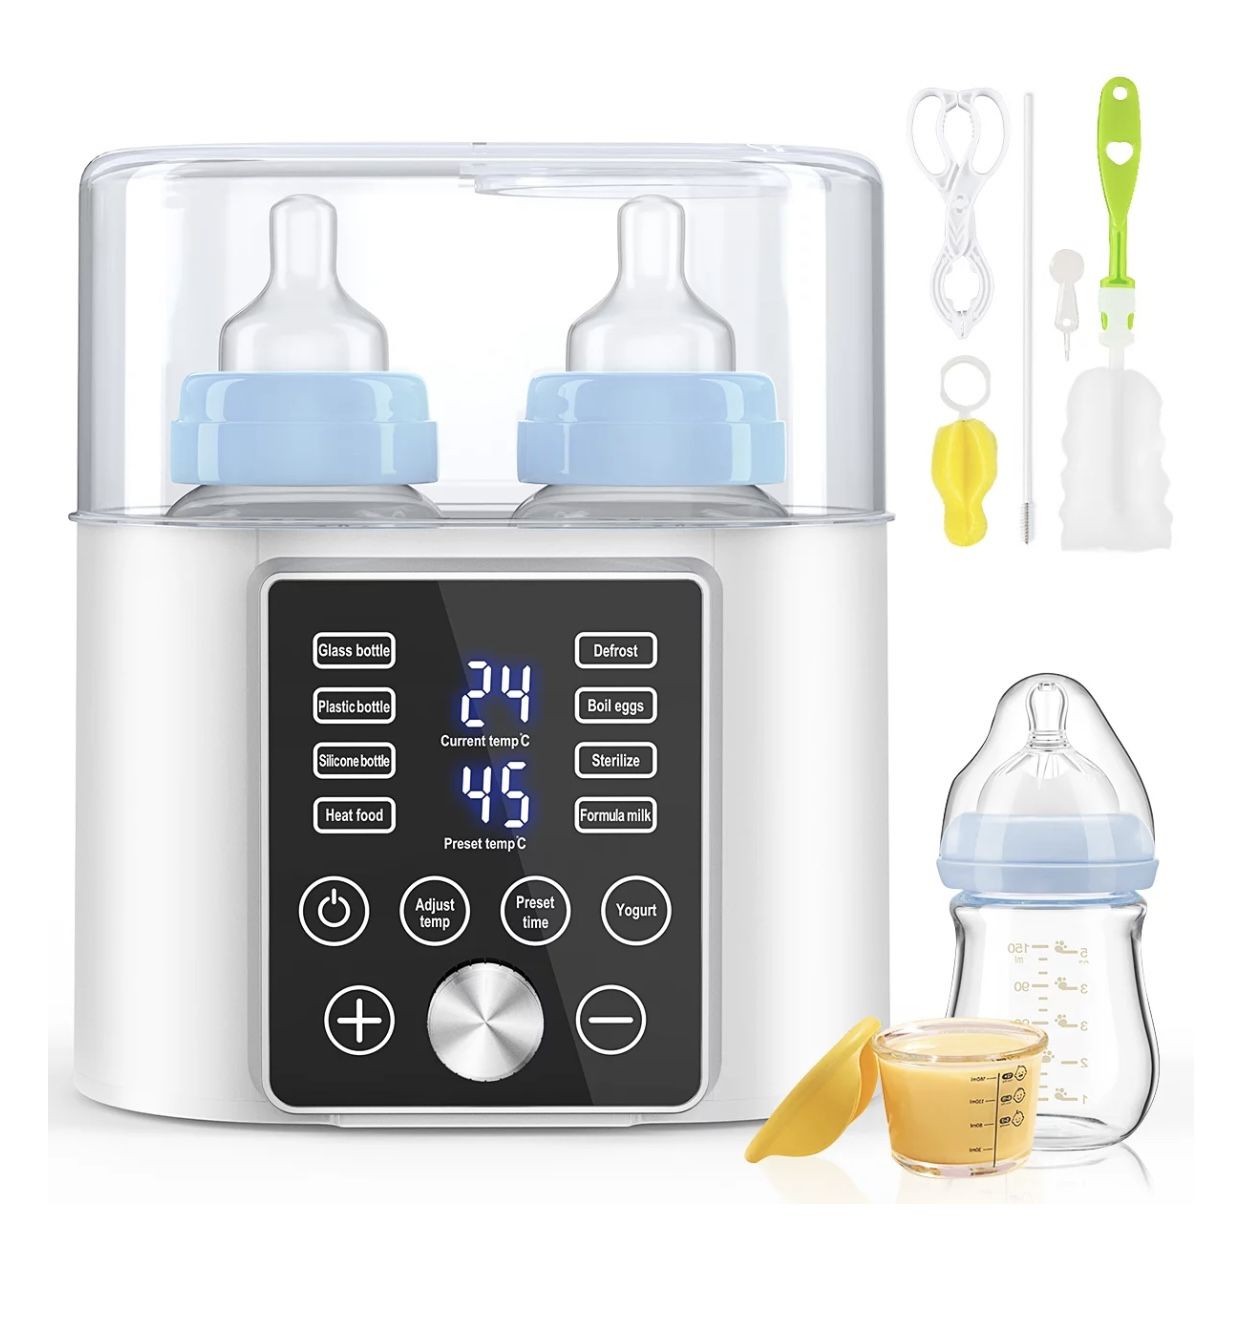 Baby Bottle Warmer, 12-in-1 Fast Milk Warmer with Appointment &Timer, 24H Accurate Temperature Control and Auto Shut Off, Baby Food Heater w/ LCD Disp